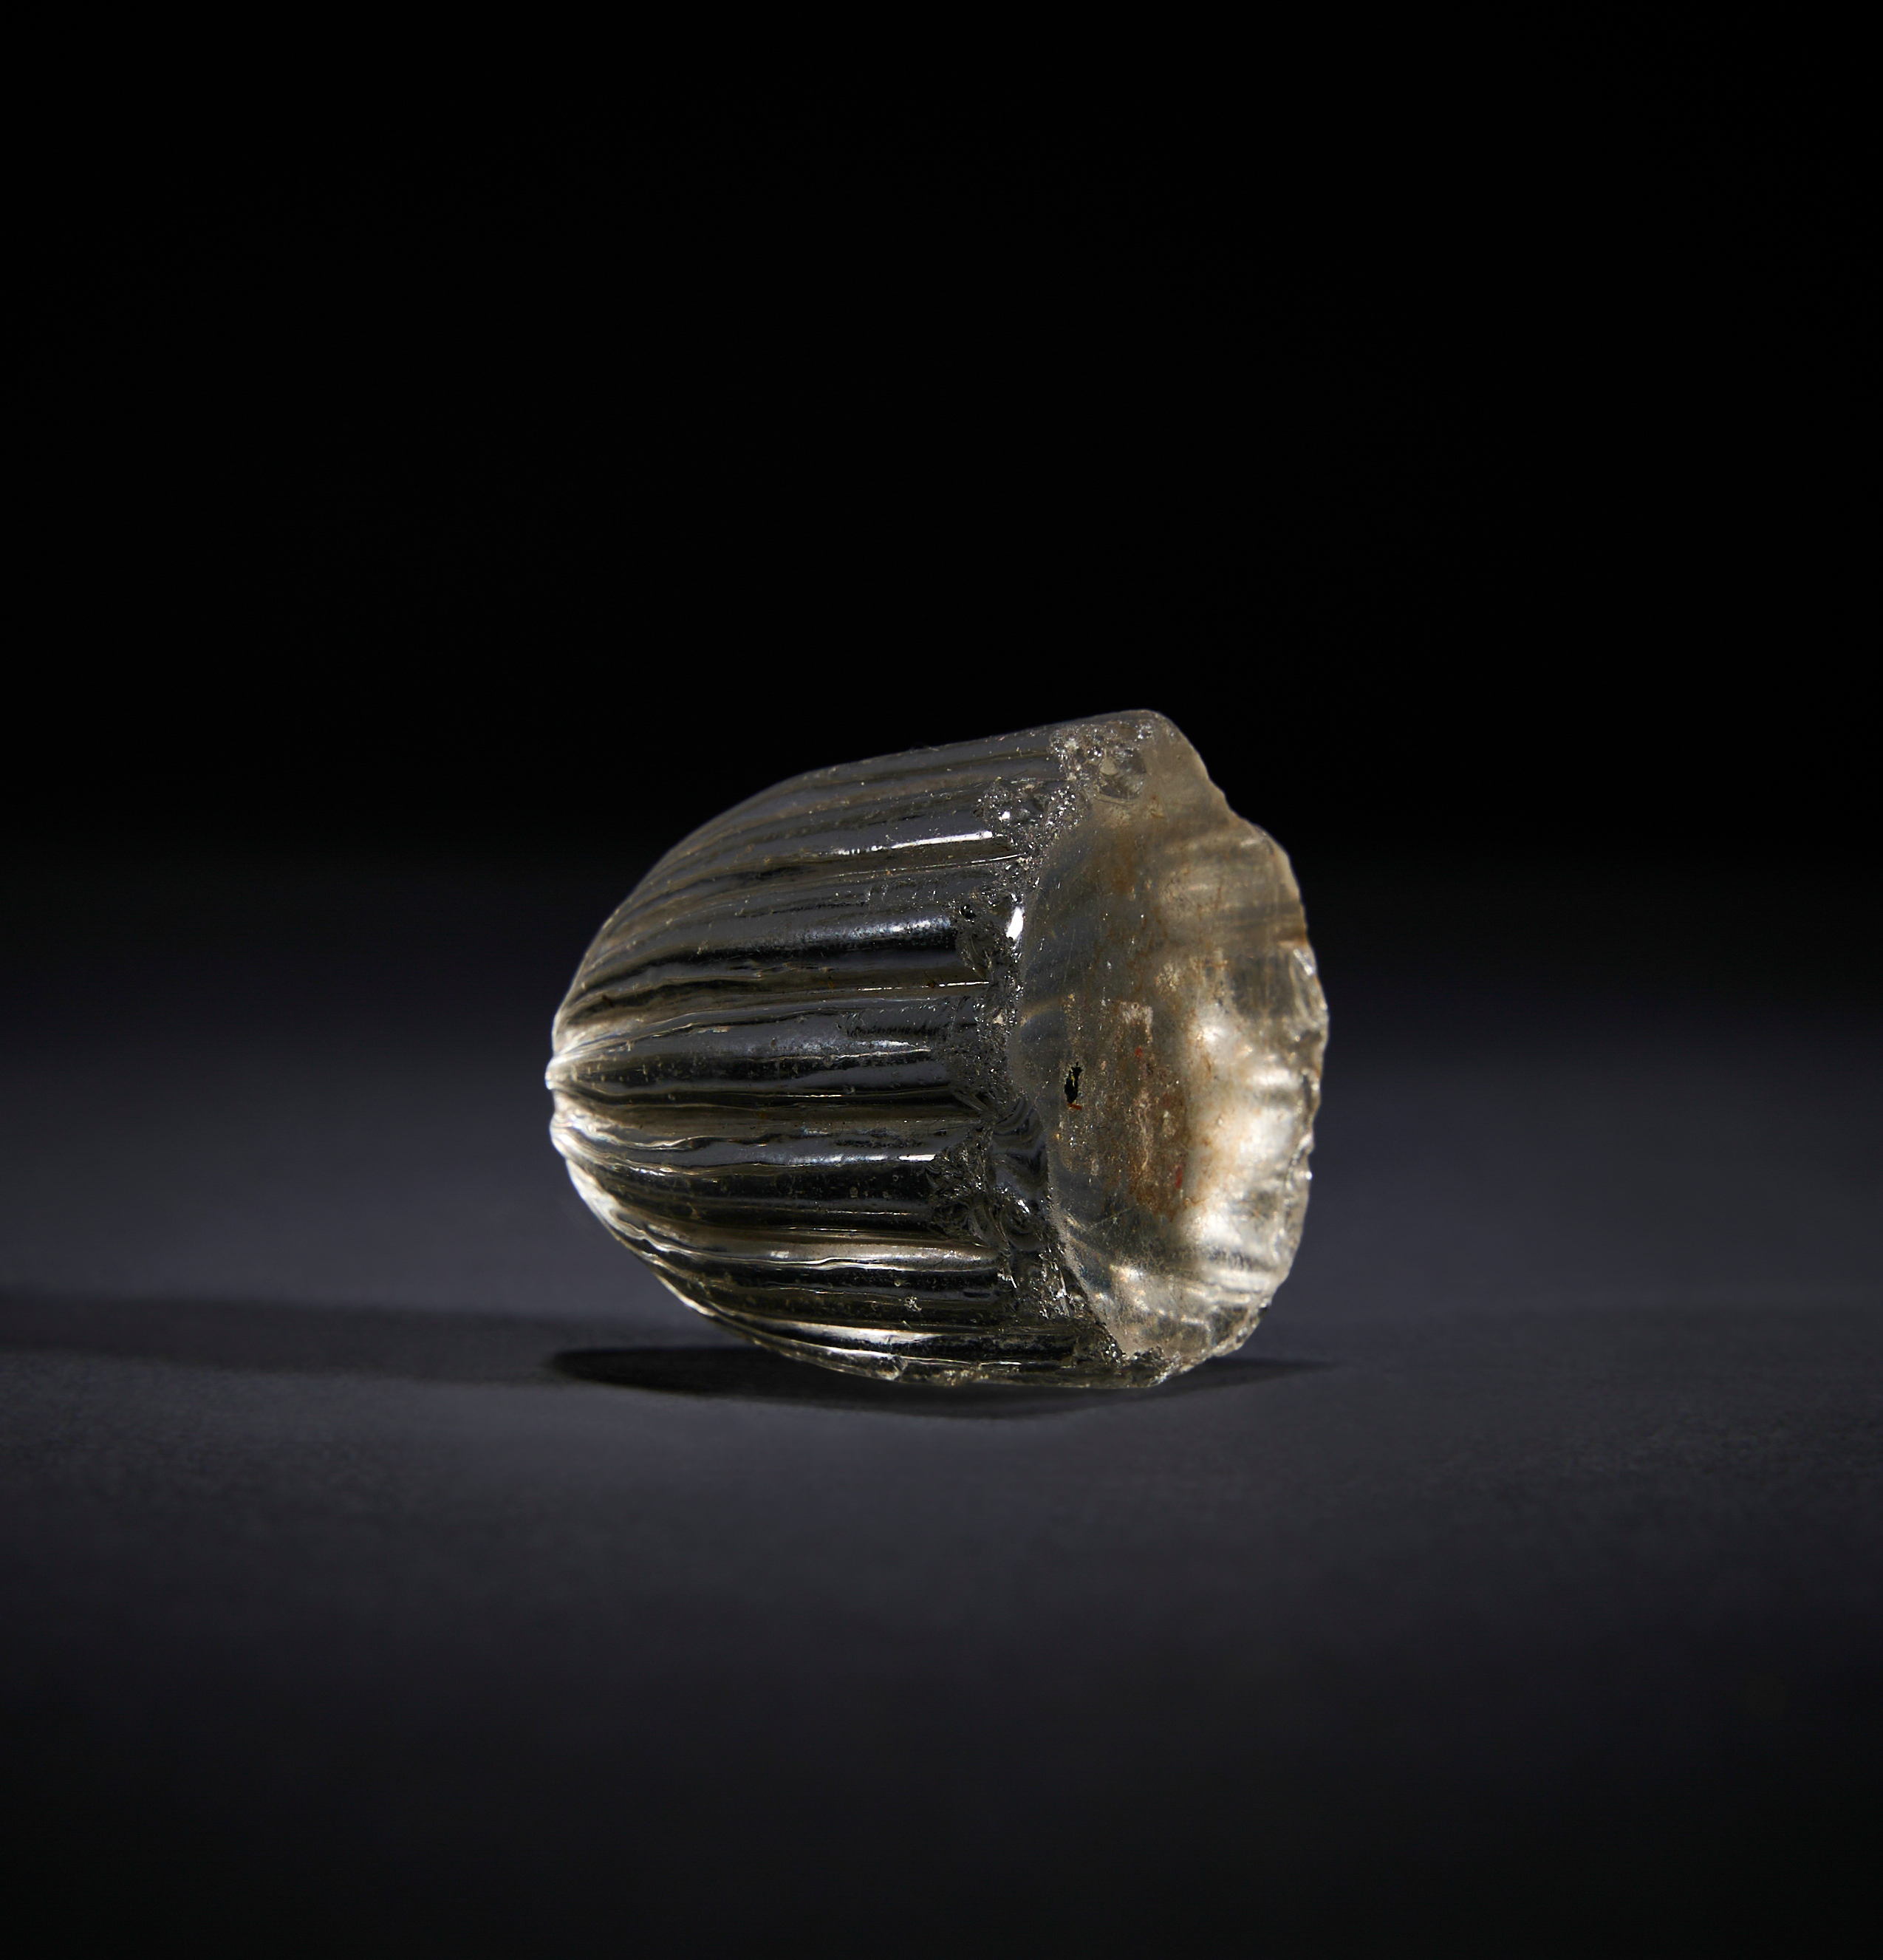 A FATIMID ROCK CRYSTAL GAME PIECE, CIRCA 10TH CENTURY, EGYPT - Image 2 of 2